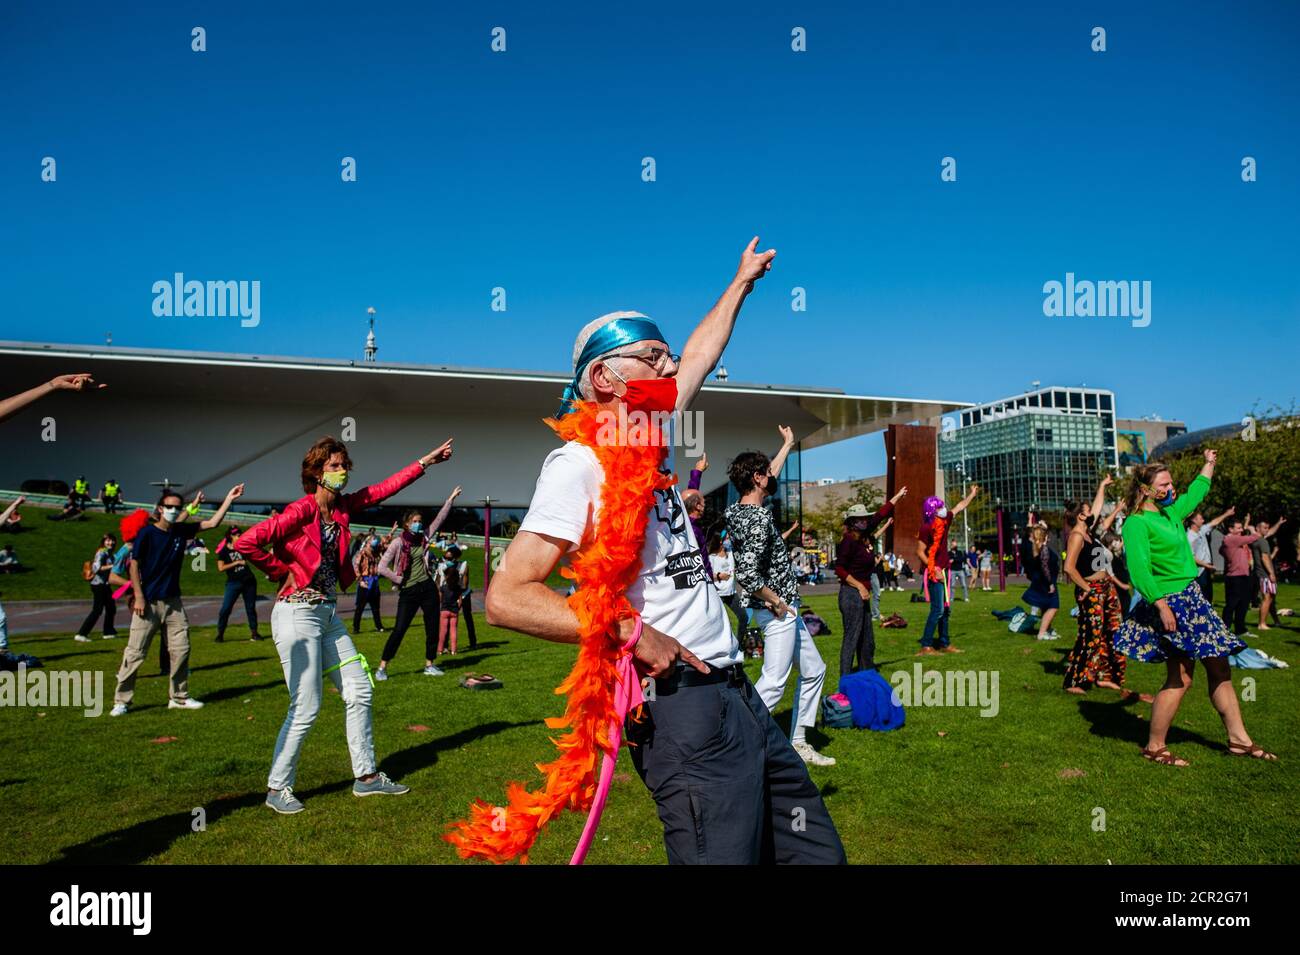 Activists are seen dancing while raising their hands during the rally.During the whole month, the climate activists group Extinction Rebellion in The Netherlands has planned a new campaign called 'September Rebellion' to draw attention to the climate and ecological crisis. At the Museumplein, in Amsterdam, hundreds of XR activists danced to demand action against climate change in what protesters dubbed “civil disco-bedience”. Activists waved flags and danced to songs including the Bee Gees’ 1977 hit, Stayin’ Alive. After the Museumplein the activists blocked for a few minutes one of the most i Stock Photo